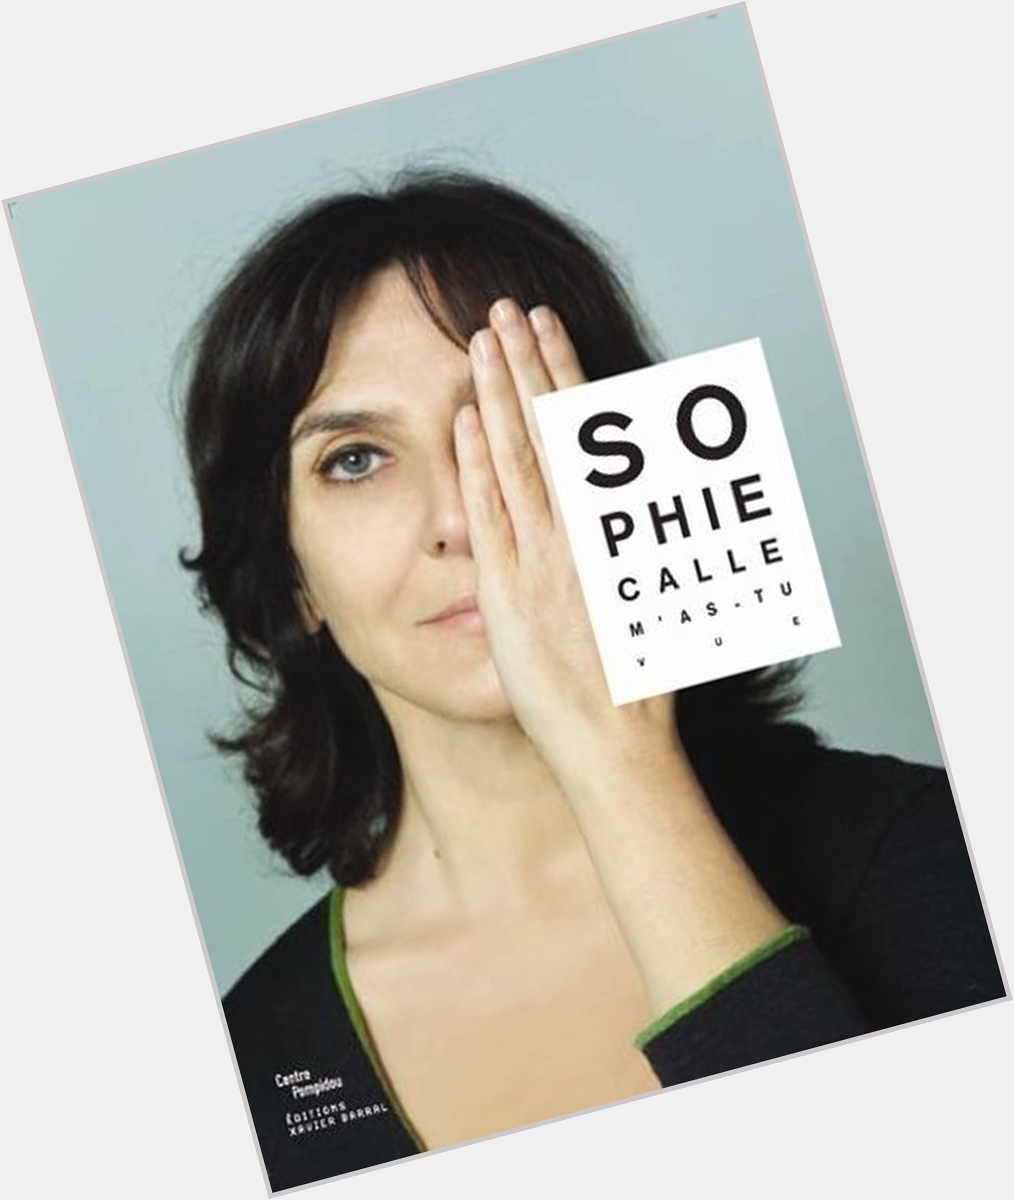 Https://fanpagepress.net/m/S/Sophie Calle New Pic 1